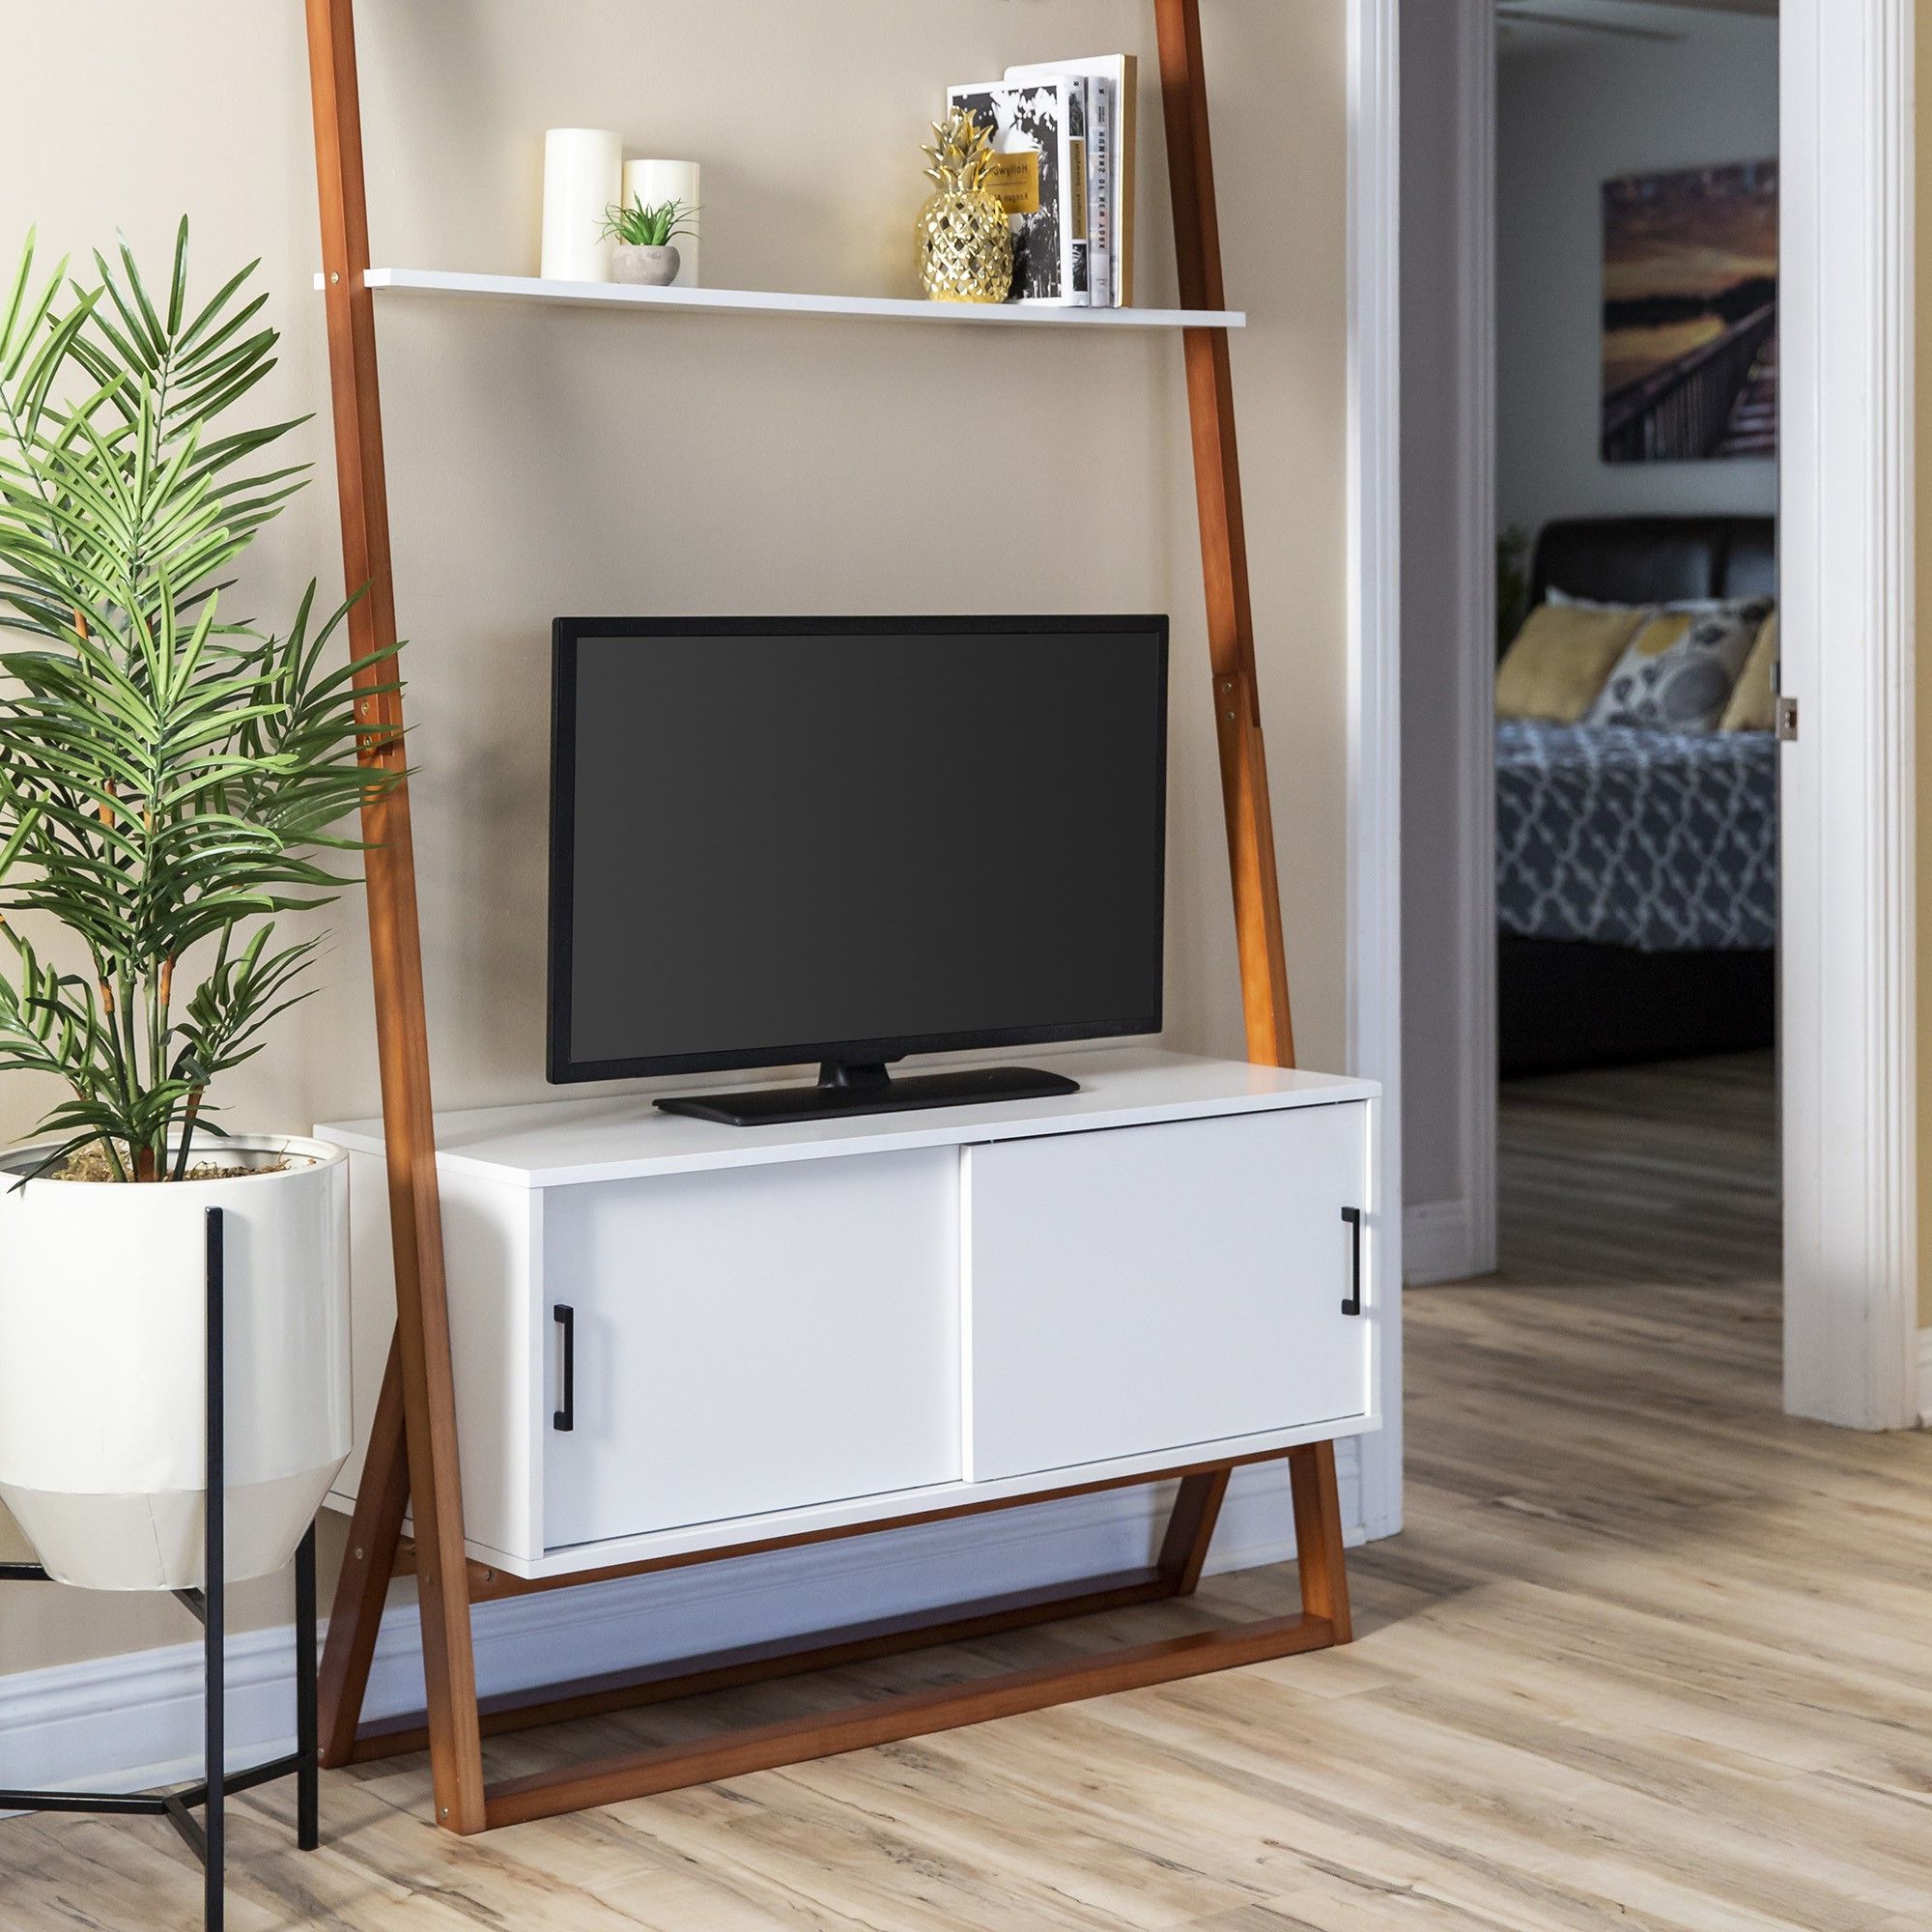 Best Choice Products 42in Modern Wooden Ladder Shelf Tv With Tiva White Ladder Tv Stands (Gallery 19 of 20)